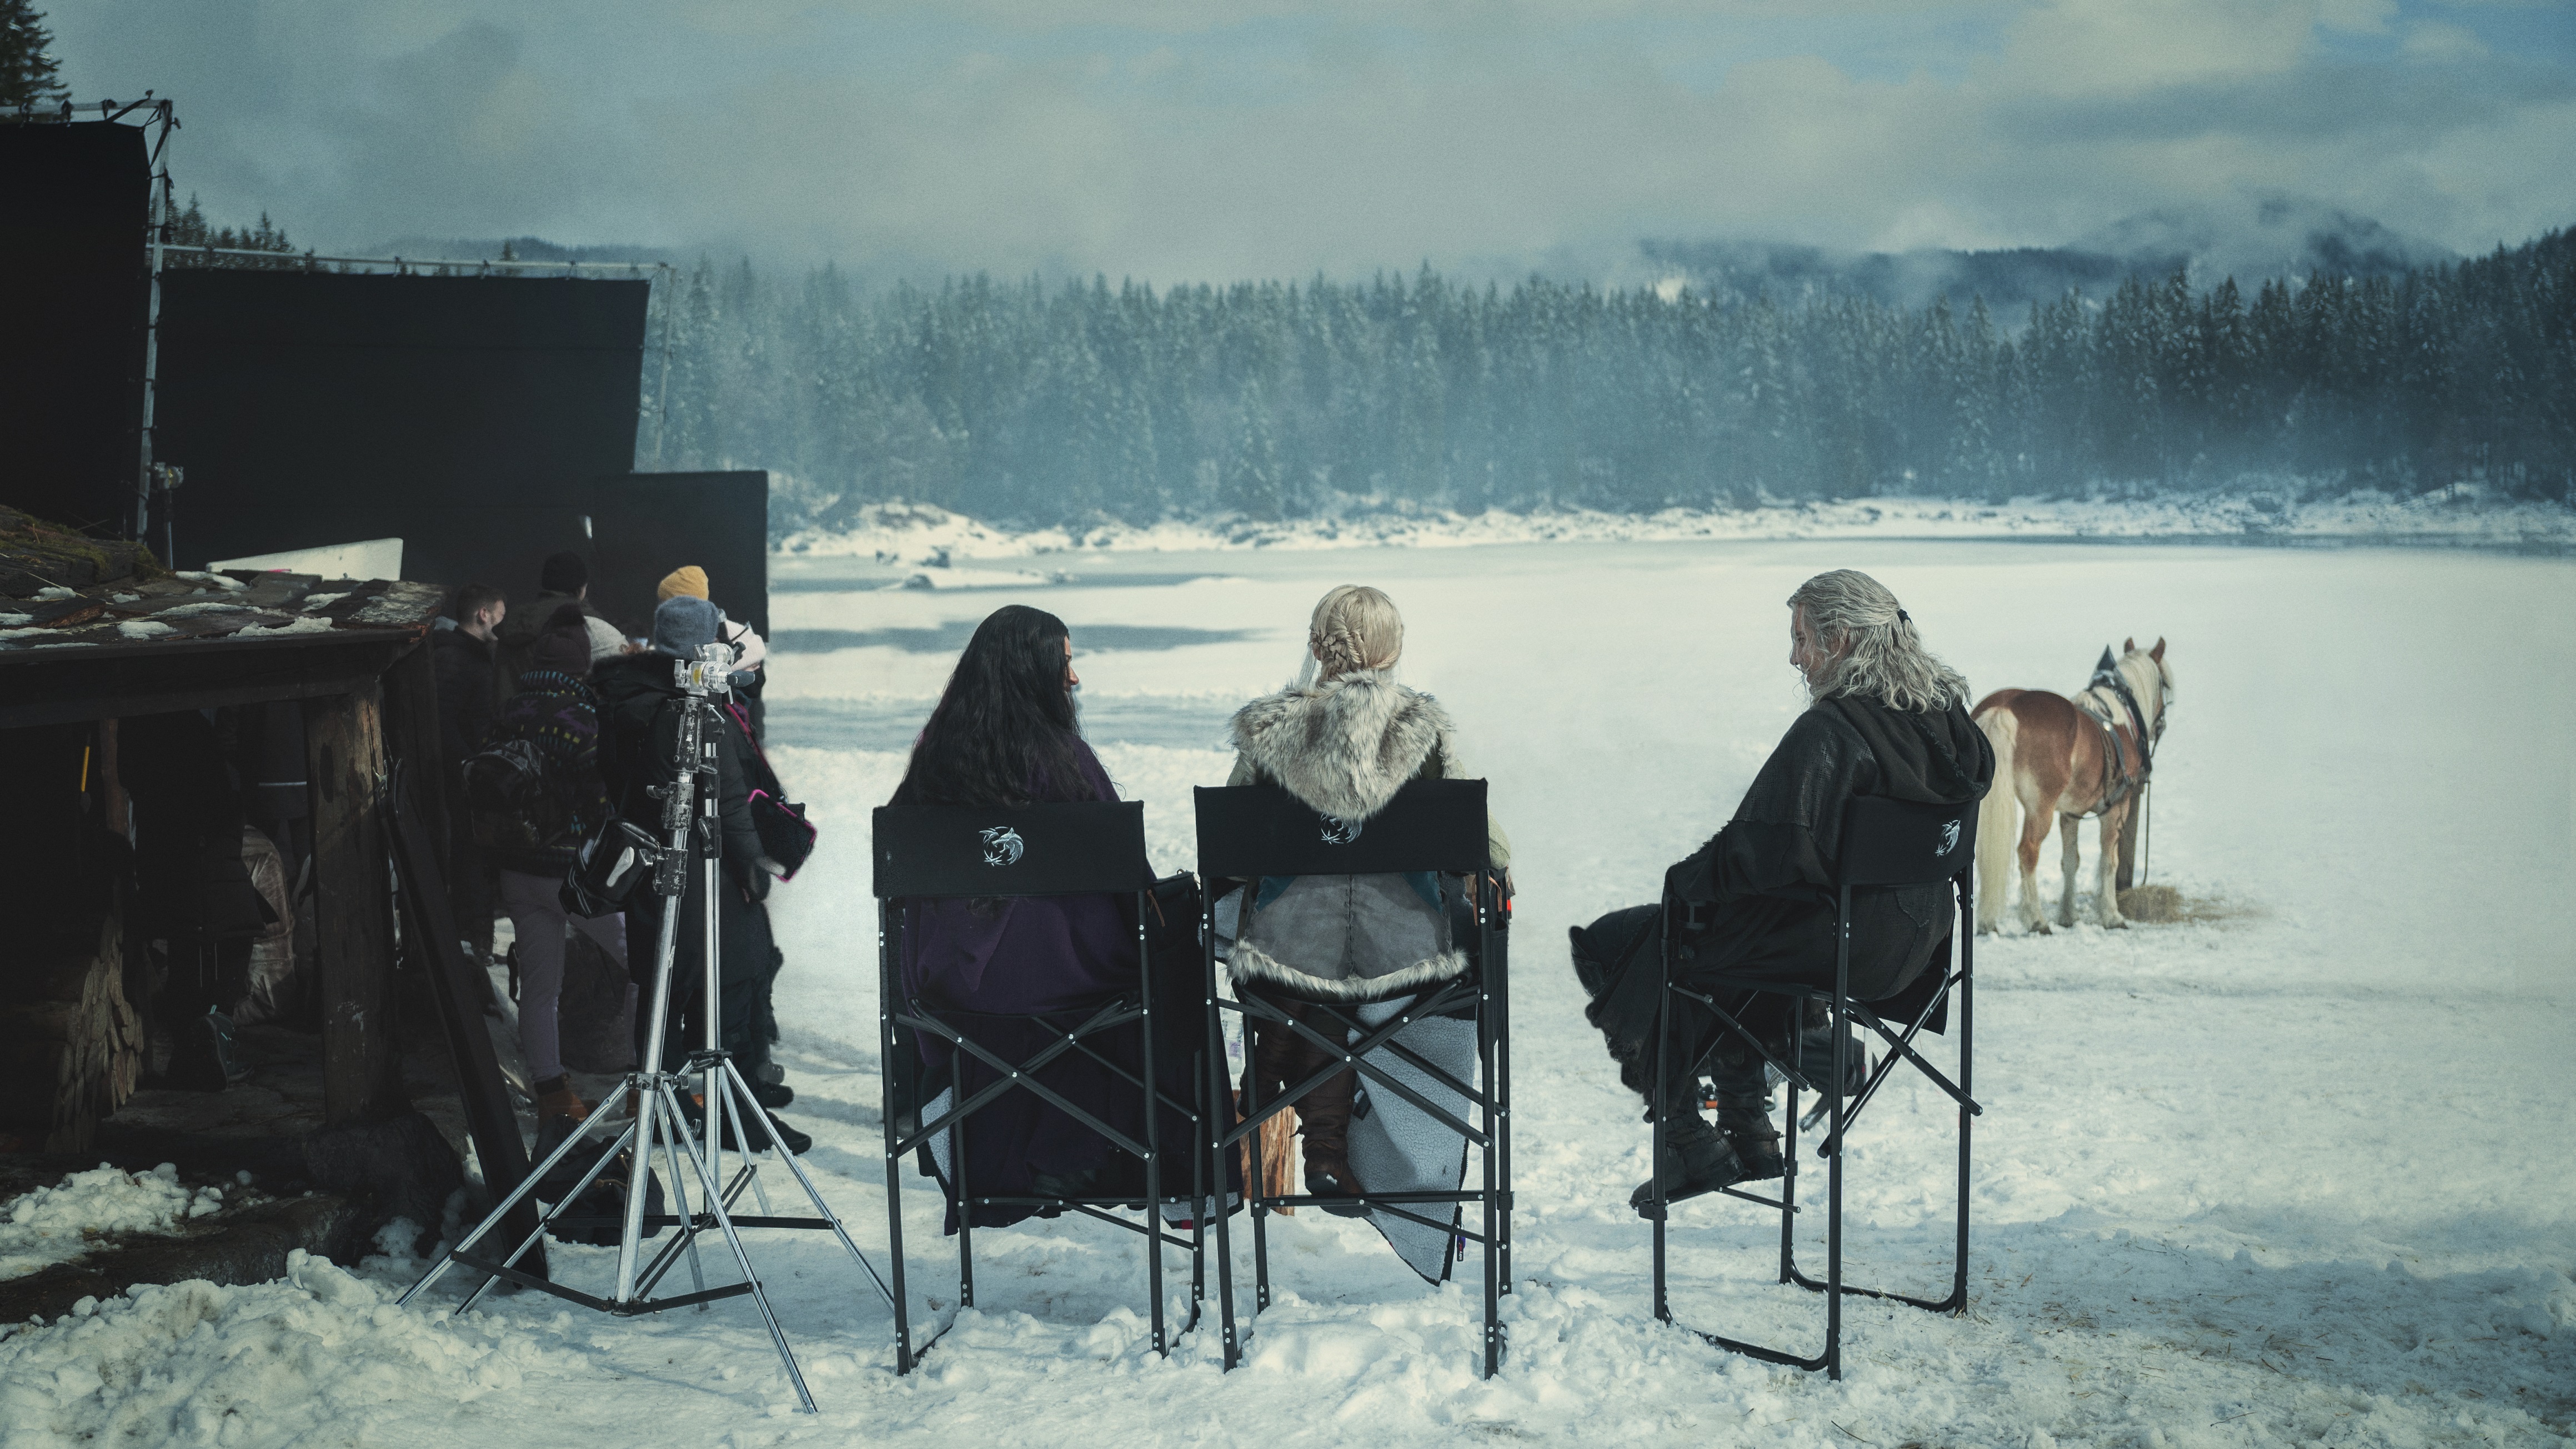 A behind-the-scenes image of The Witcher's three main actors as filming for Season 3 begins